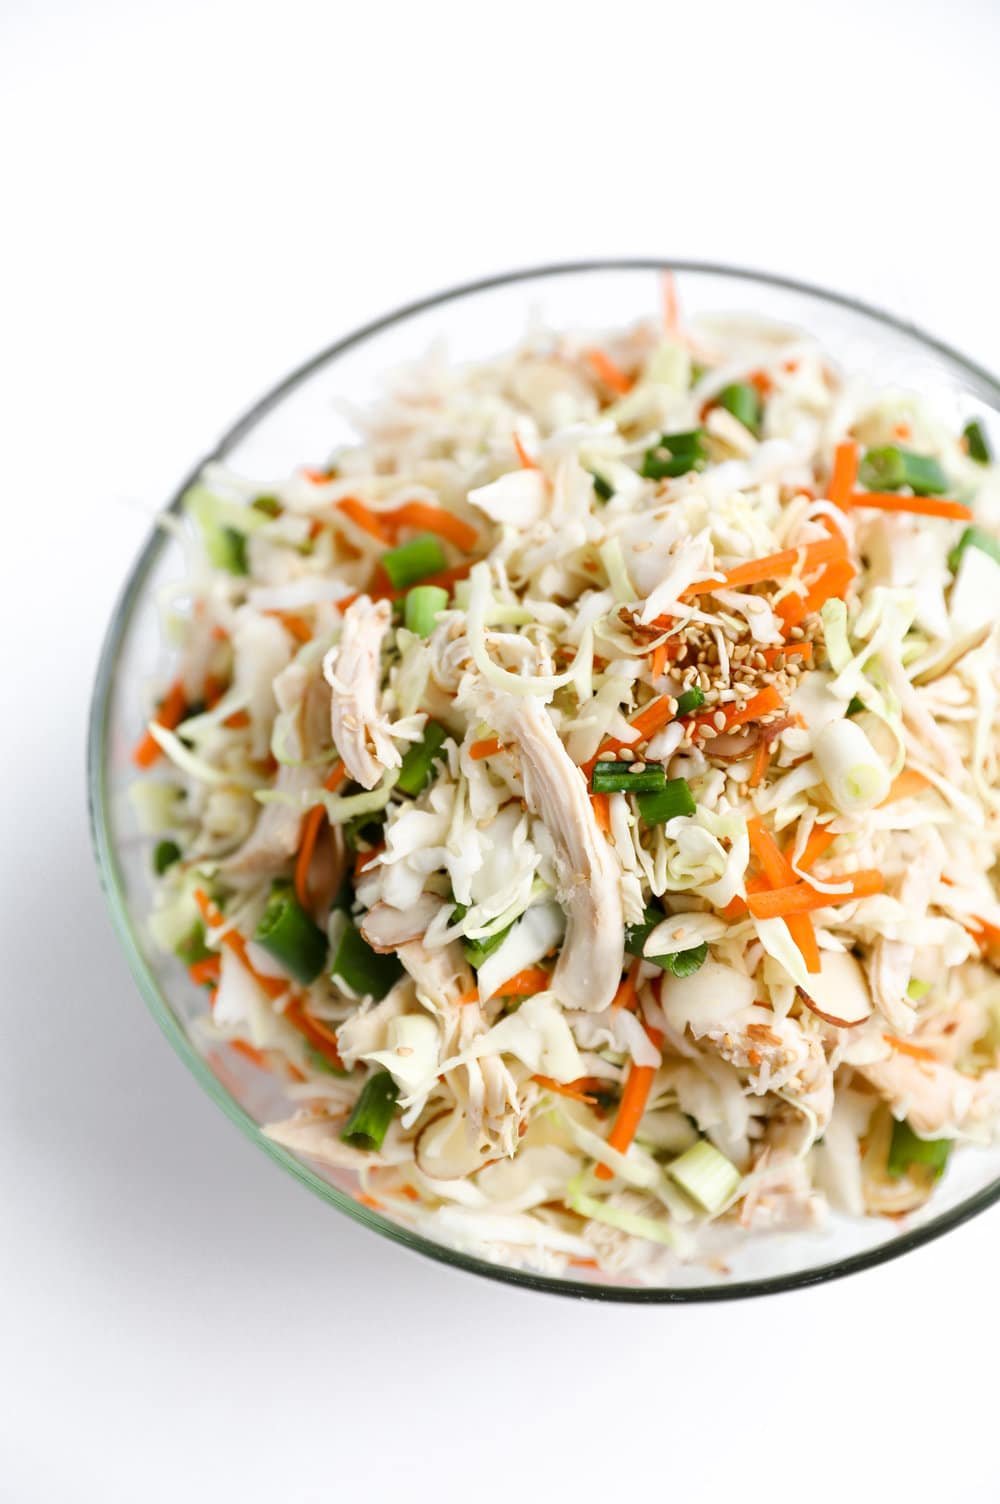 mixed chicken and cabbage salad in glass bowl